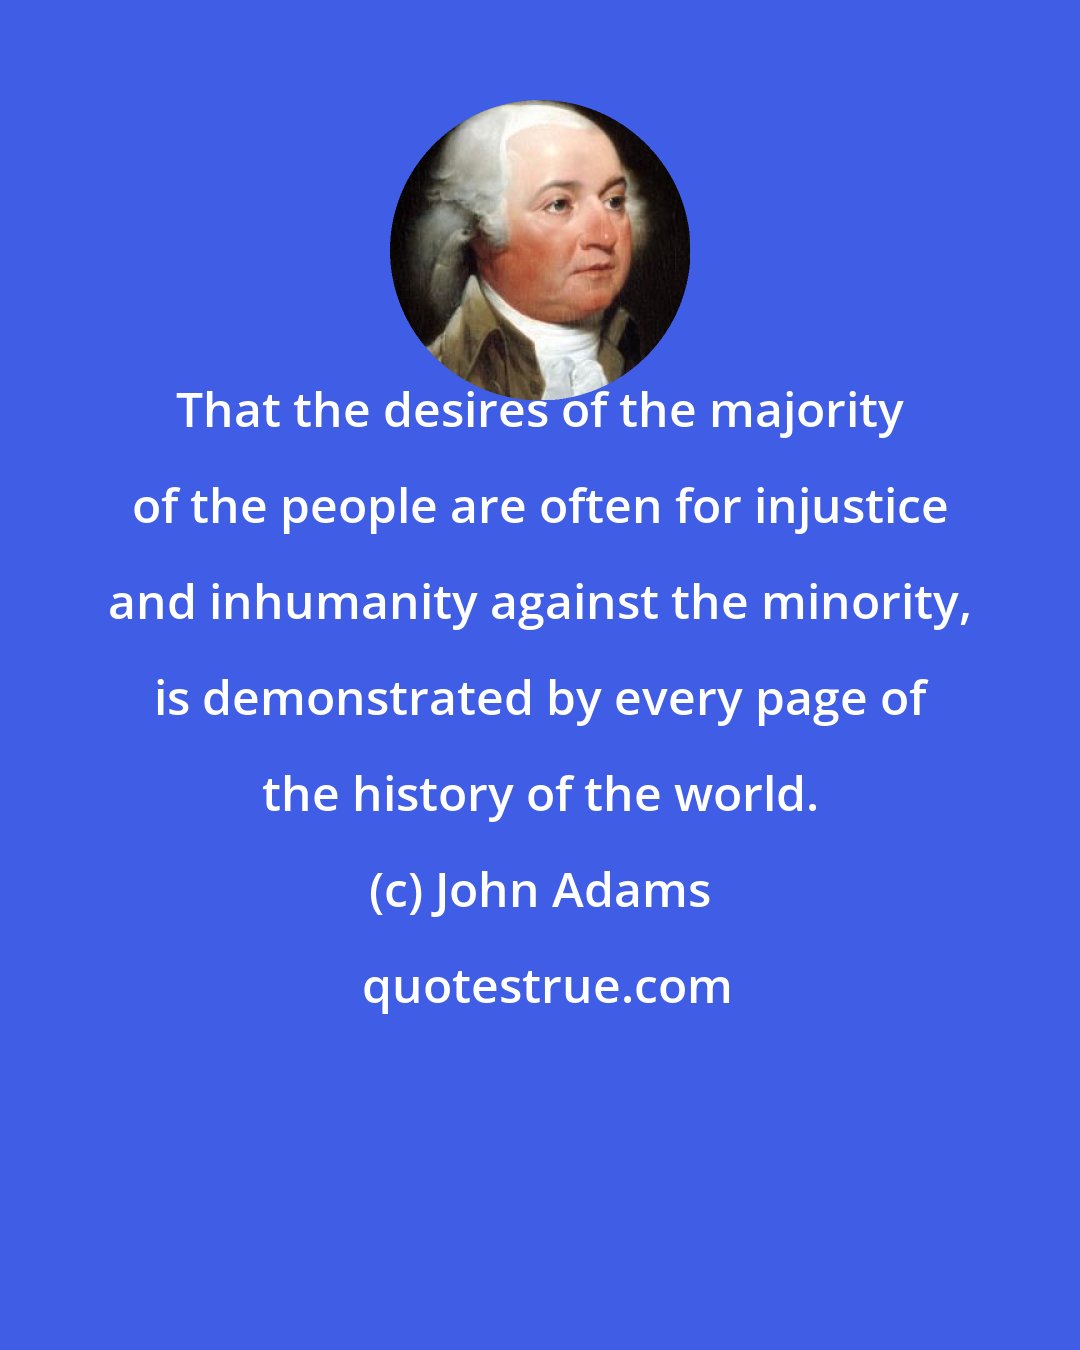 John Adams: That the desires of the majority of the people are often for injustice and inhumanity against the minority, is demonstrated by every page of the history of the world.